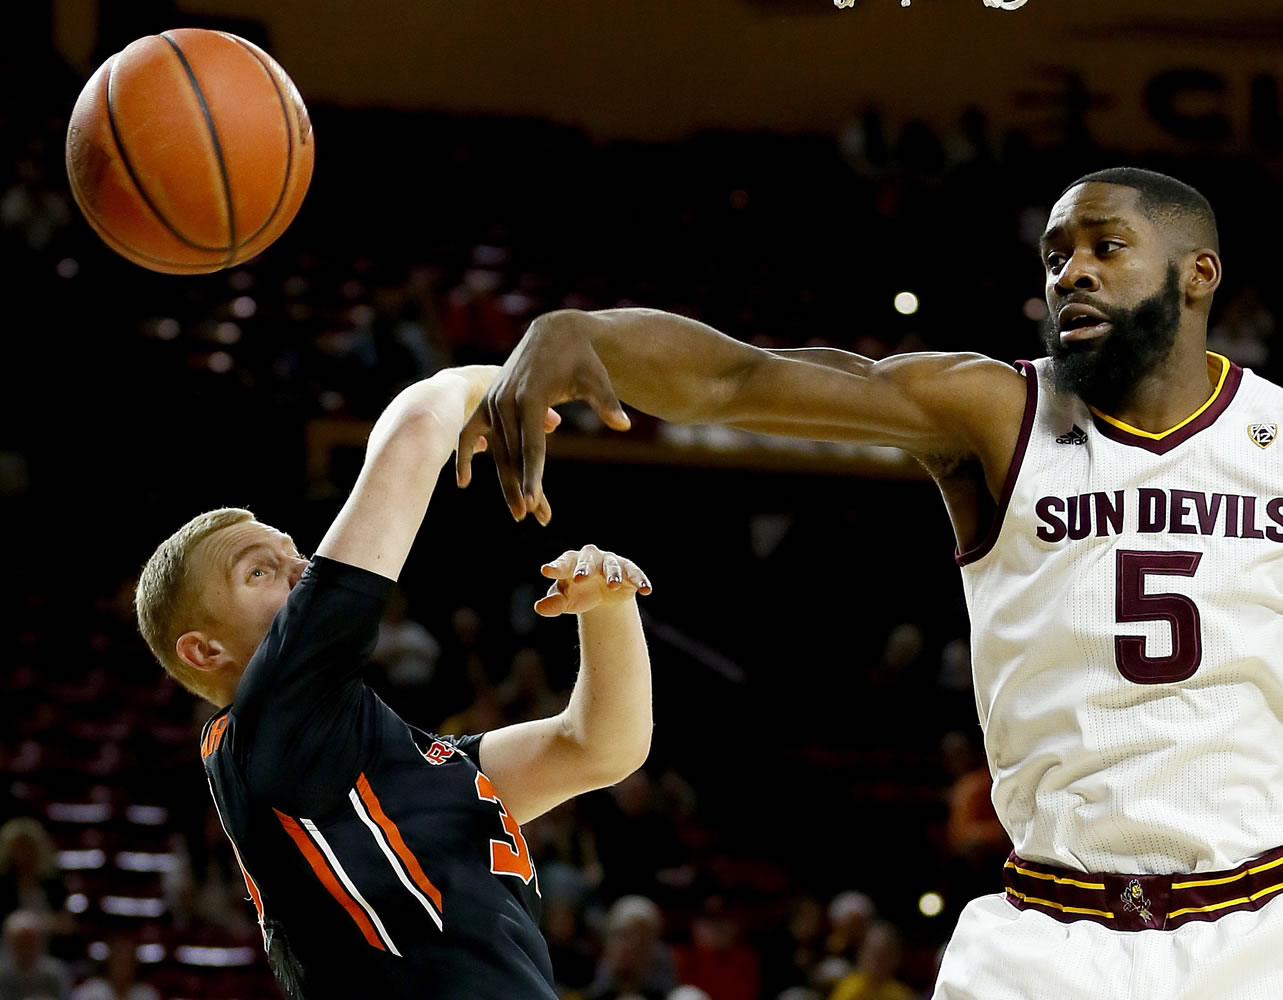 Arizona State's Obinna Oleka (5) knocks the ball away from Oregon State's Olaf Schaftenaar during the first half of an NCAA college basketball game, Thursday, Jan. 28, 2016, in Tempe, Ariz.